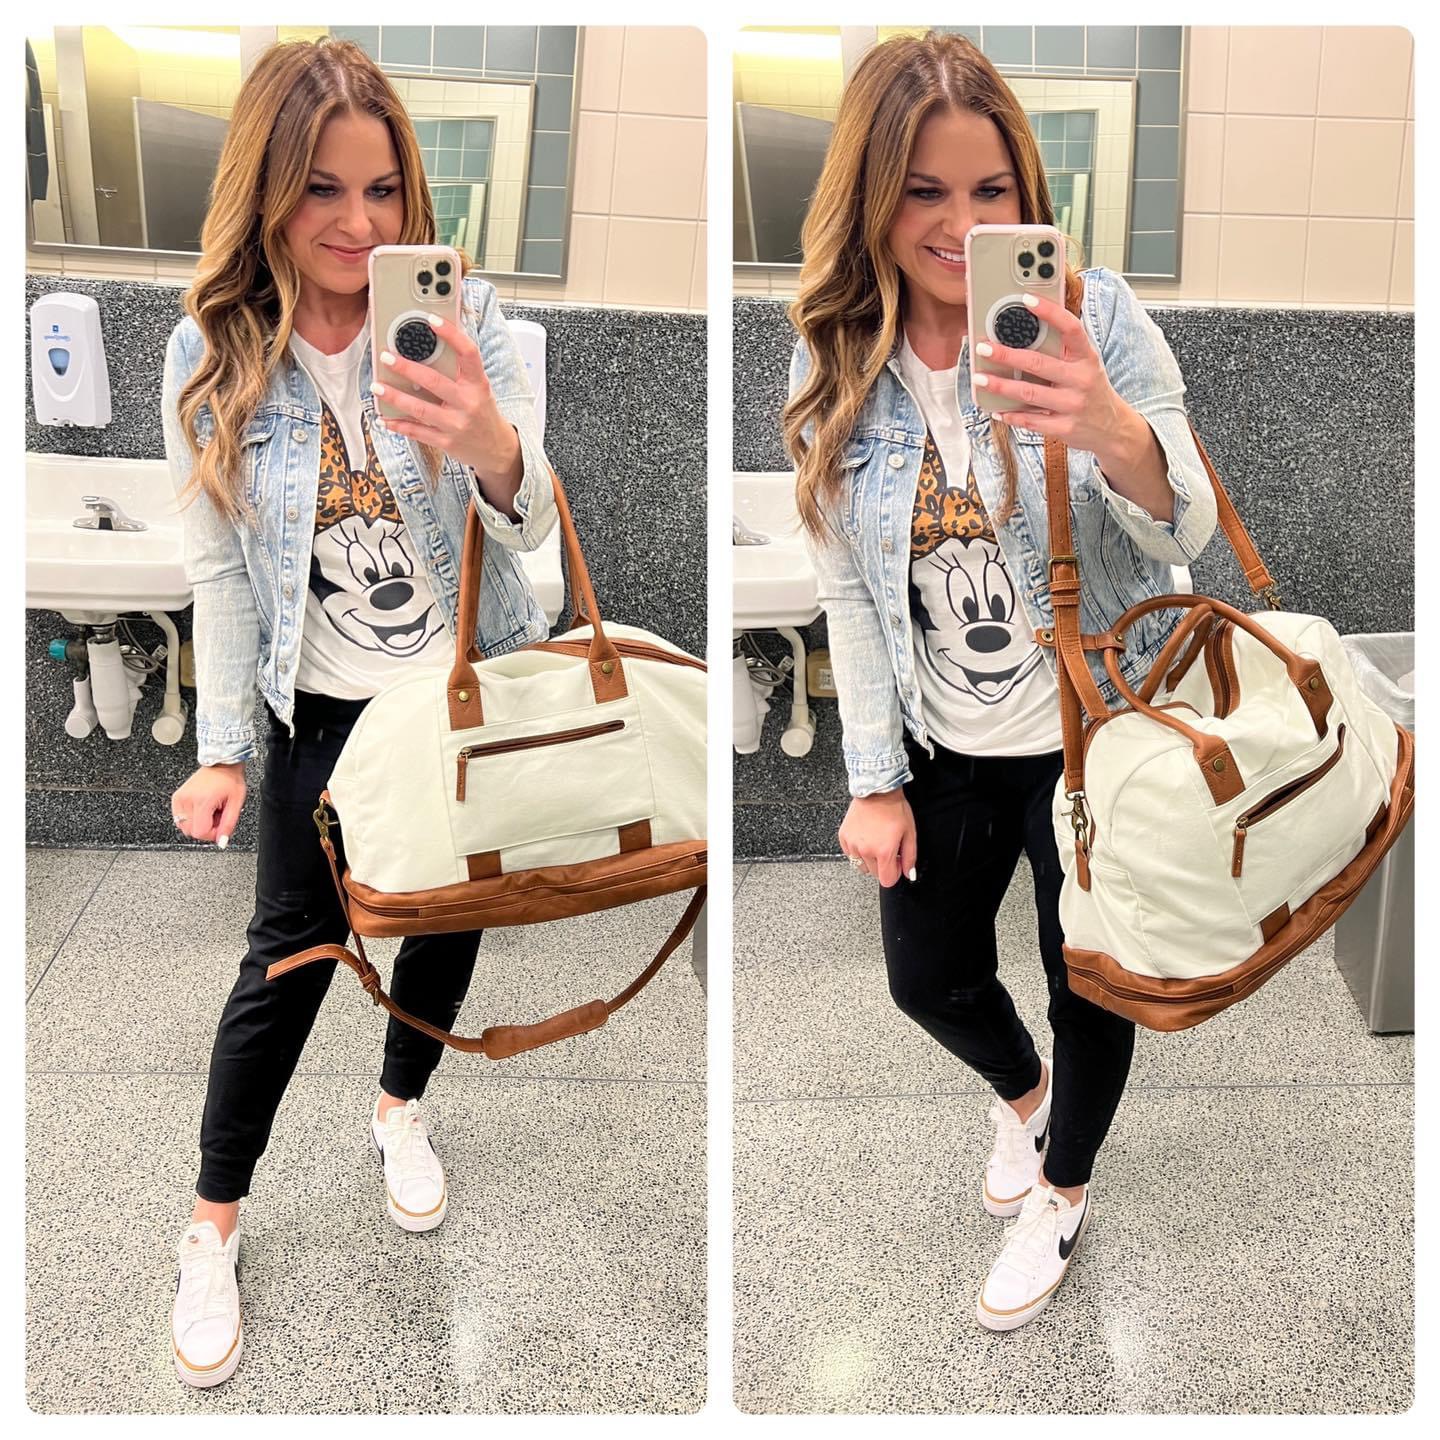 Stylish and Comfortable: Travel Outfit Ideas & Must Haves for Your Next Adventure

travel, travel outfit, vacation, vacation outfit, casual outfit, summer vacation, spring vacation, carry-on bag, white sneakers